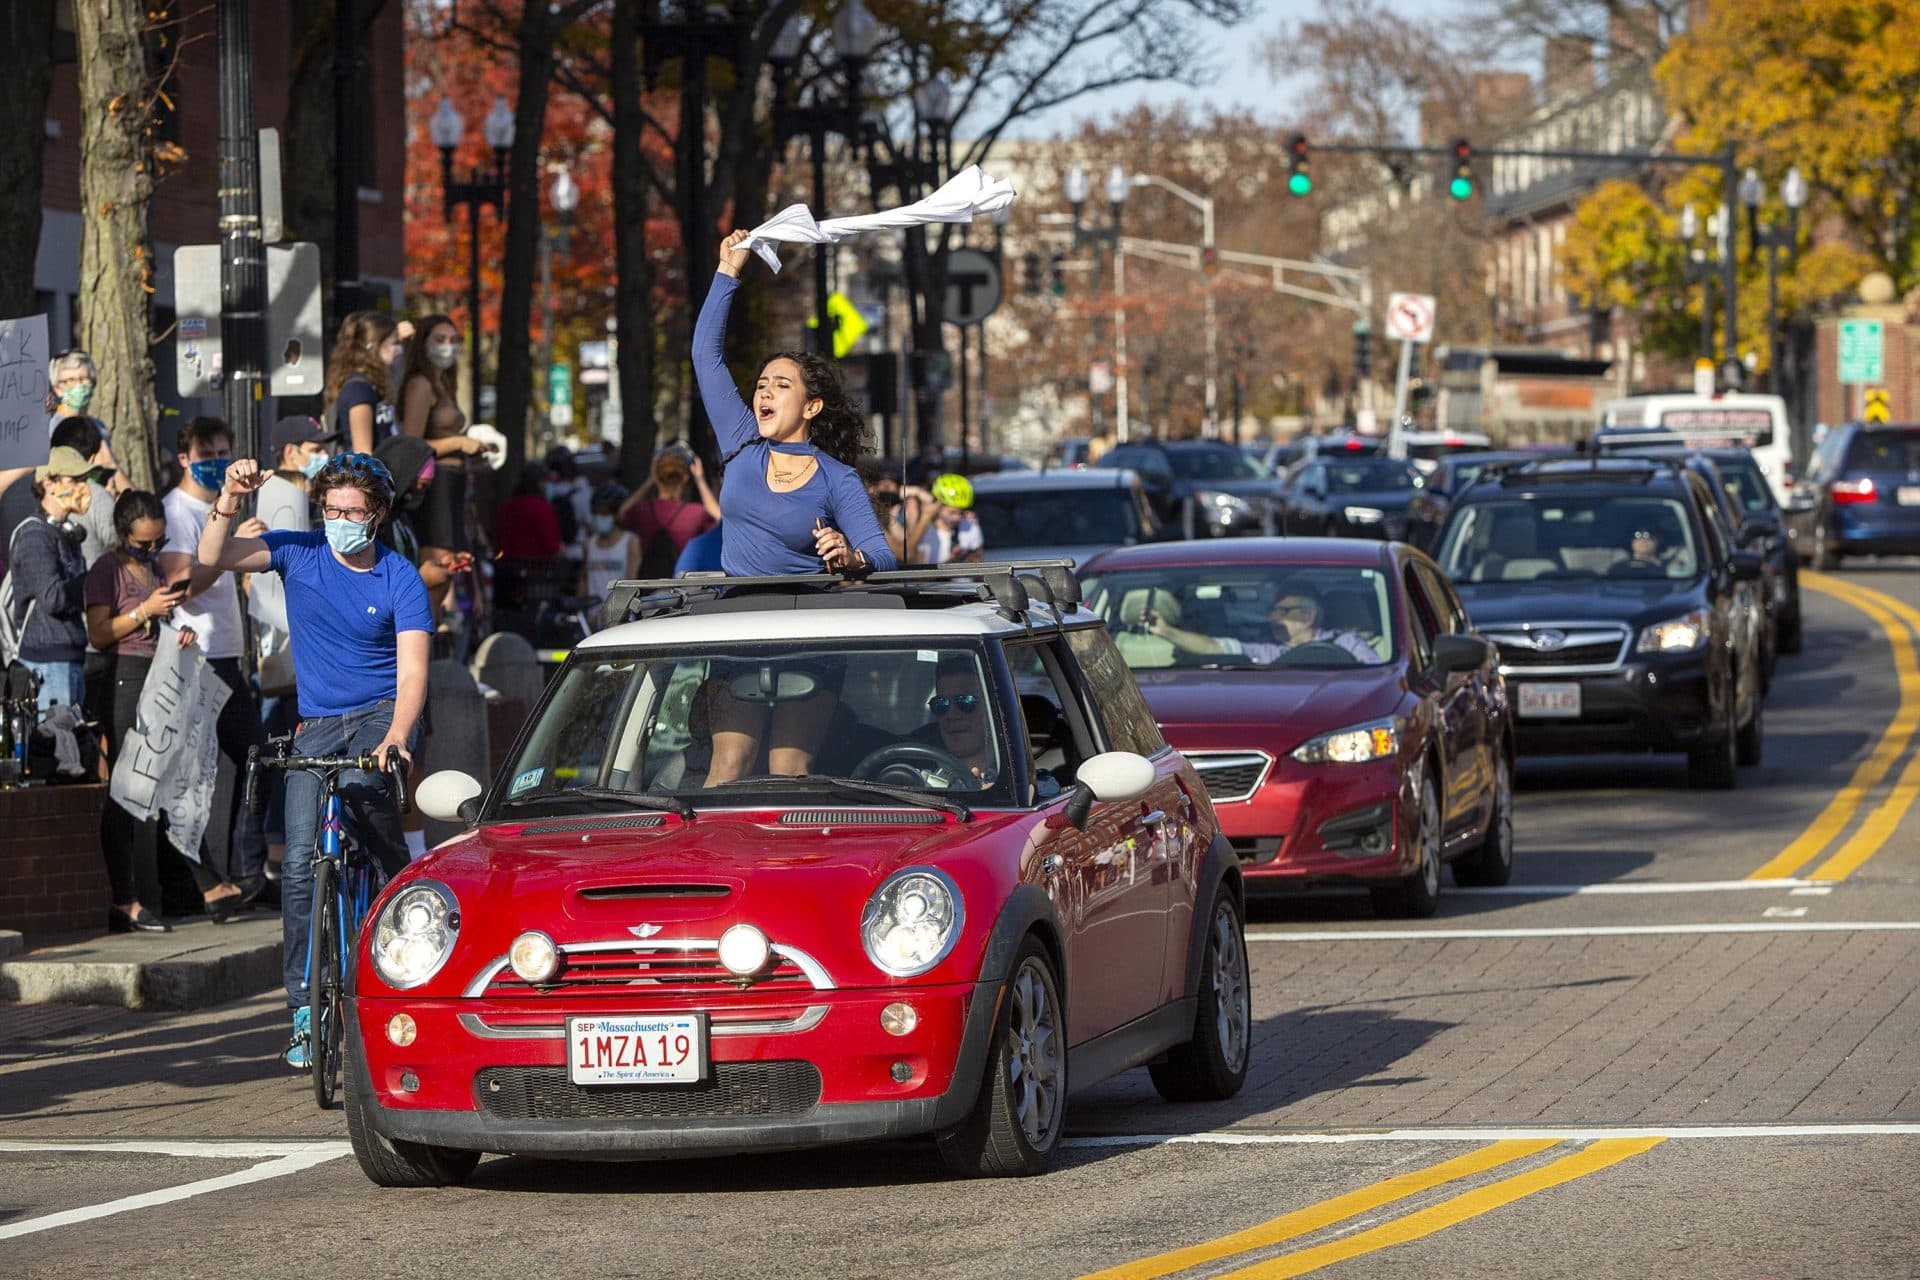 Cars honk their horns for the cheering crowd in Harvard Square. Many were out celebrating Joe Biden's victory. (Robin Lubbock/WBUR)